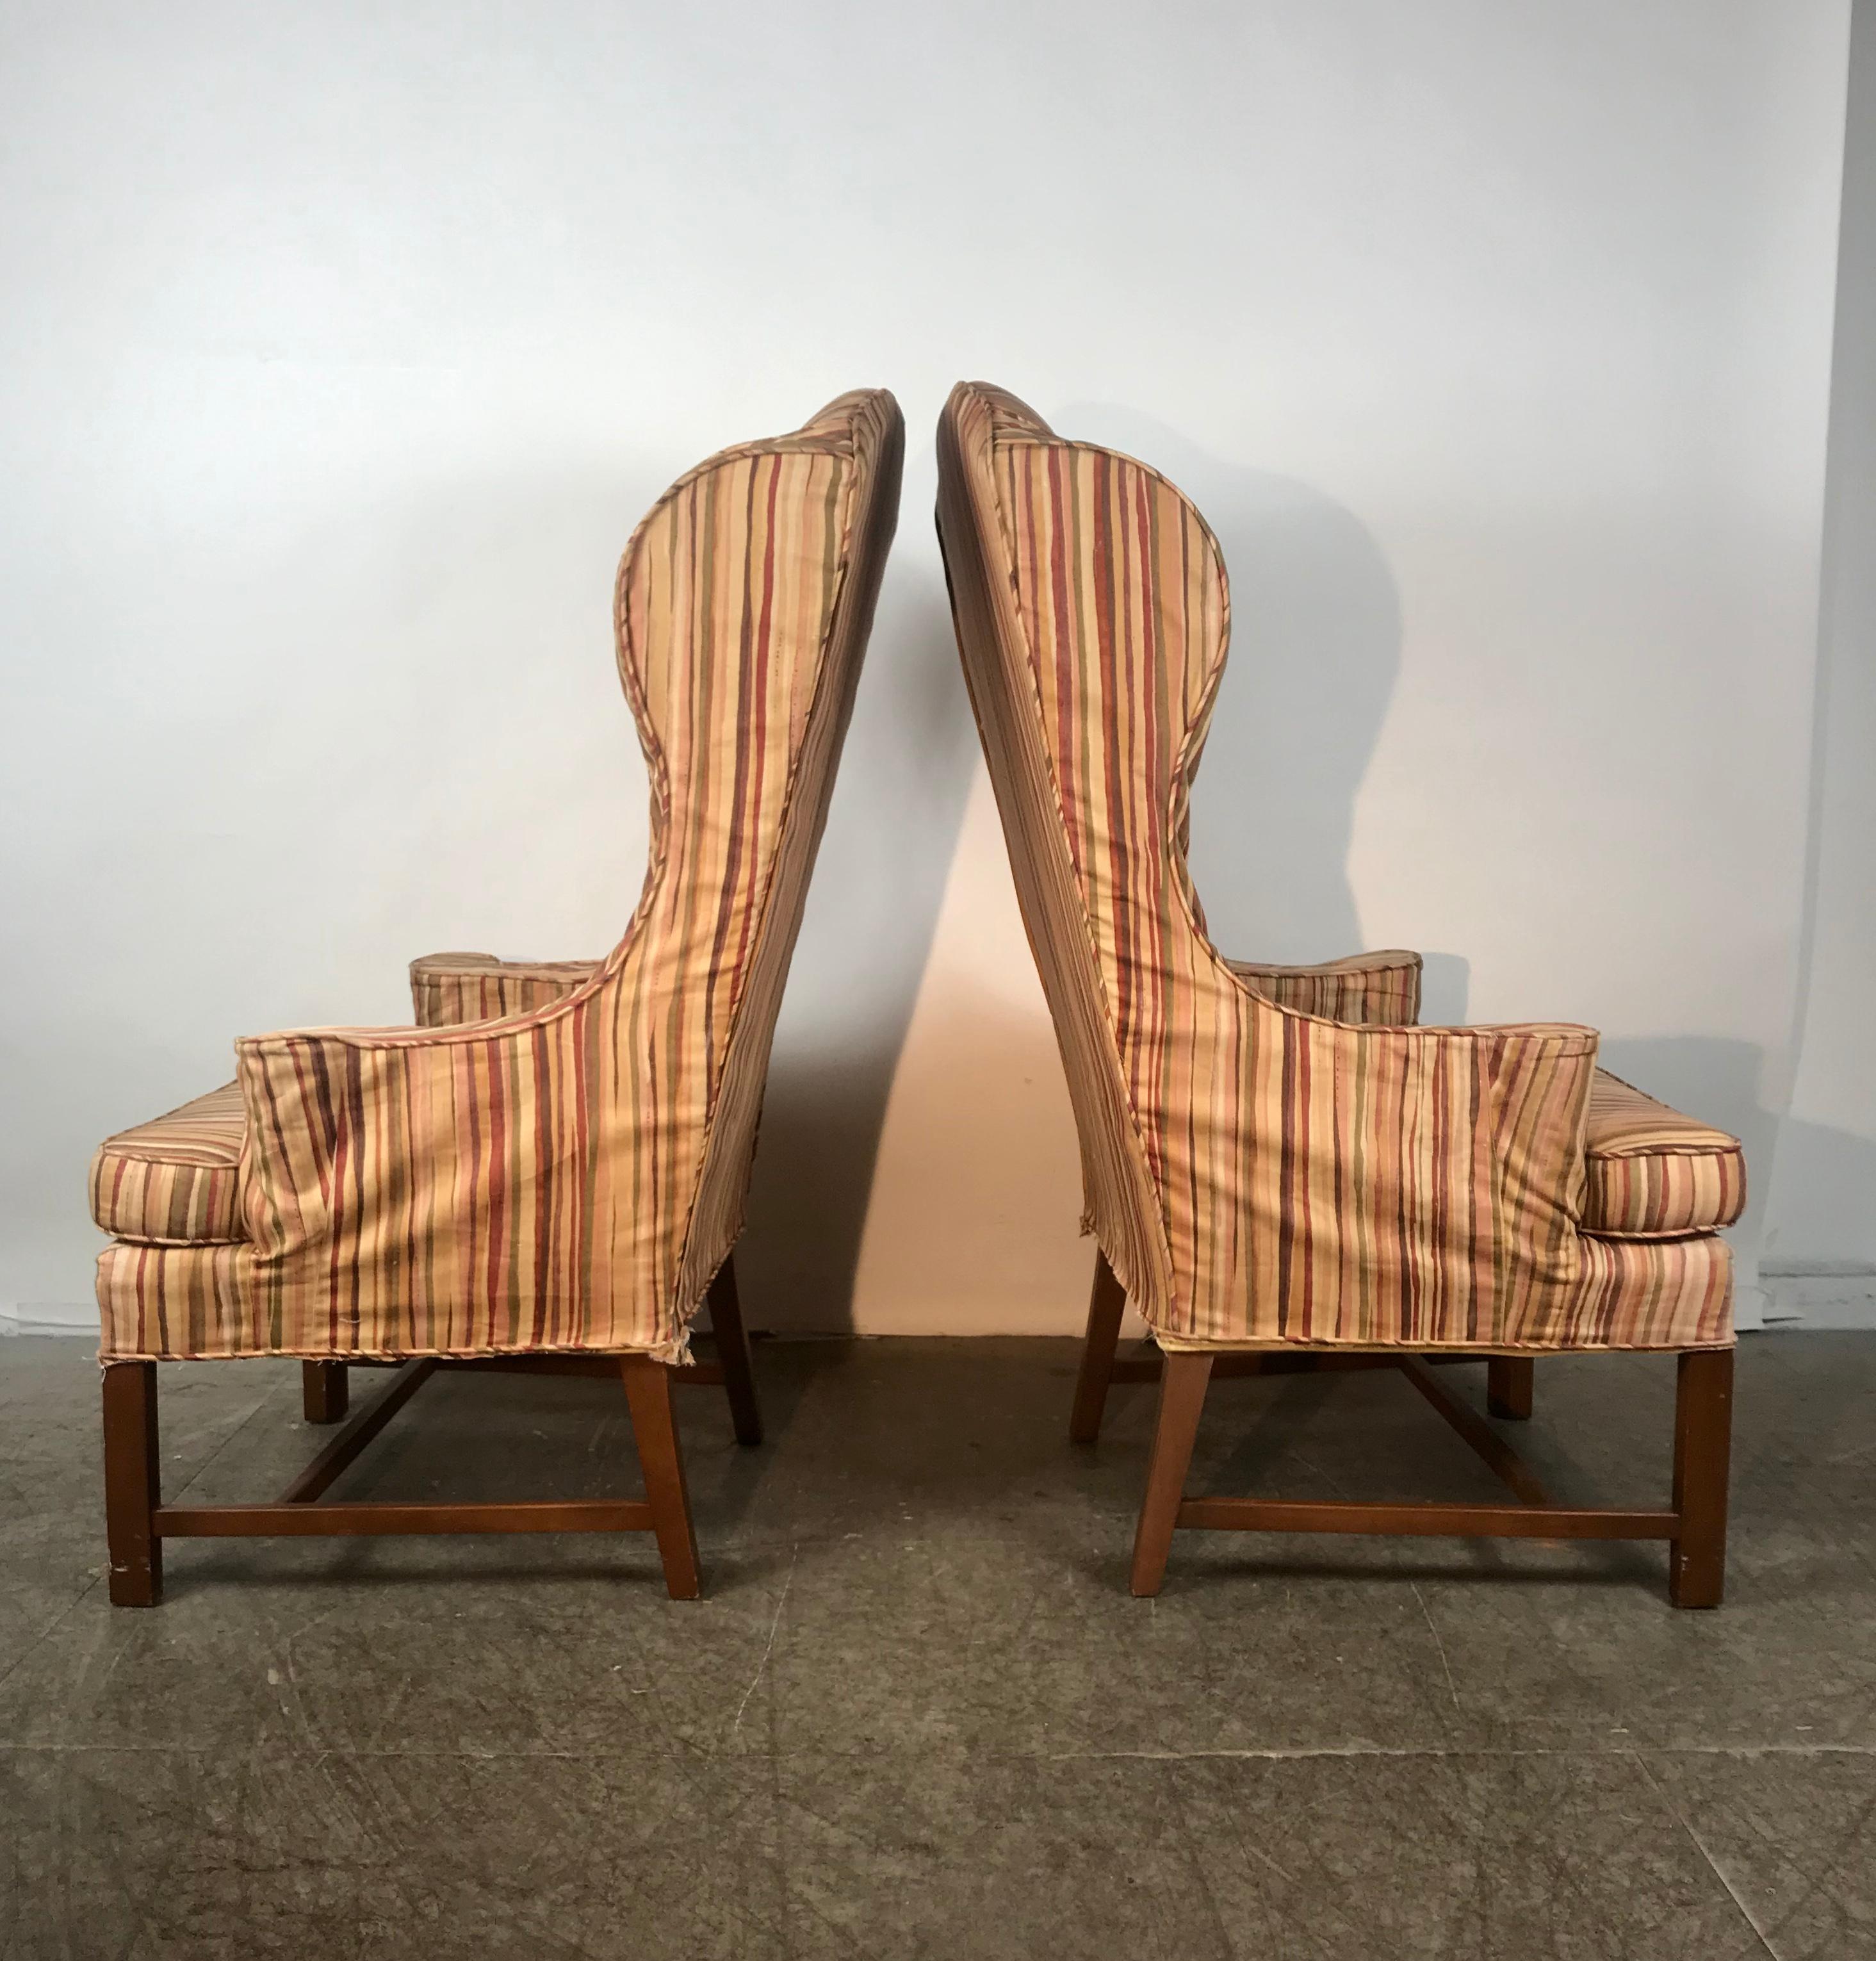 20th Century Dramatic Pair of Wing Back Scroll Arm Chairs Attributed to Kittinger